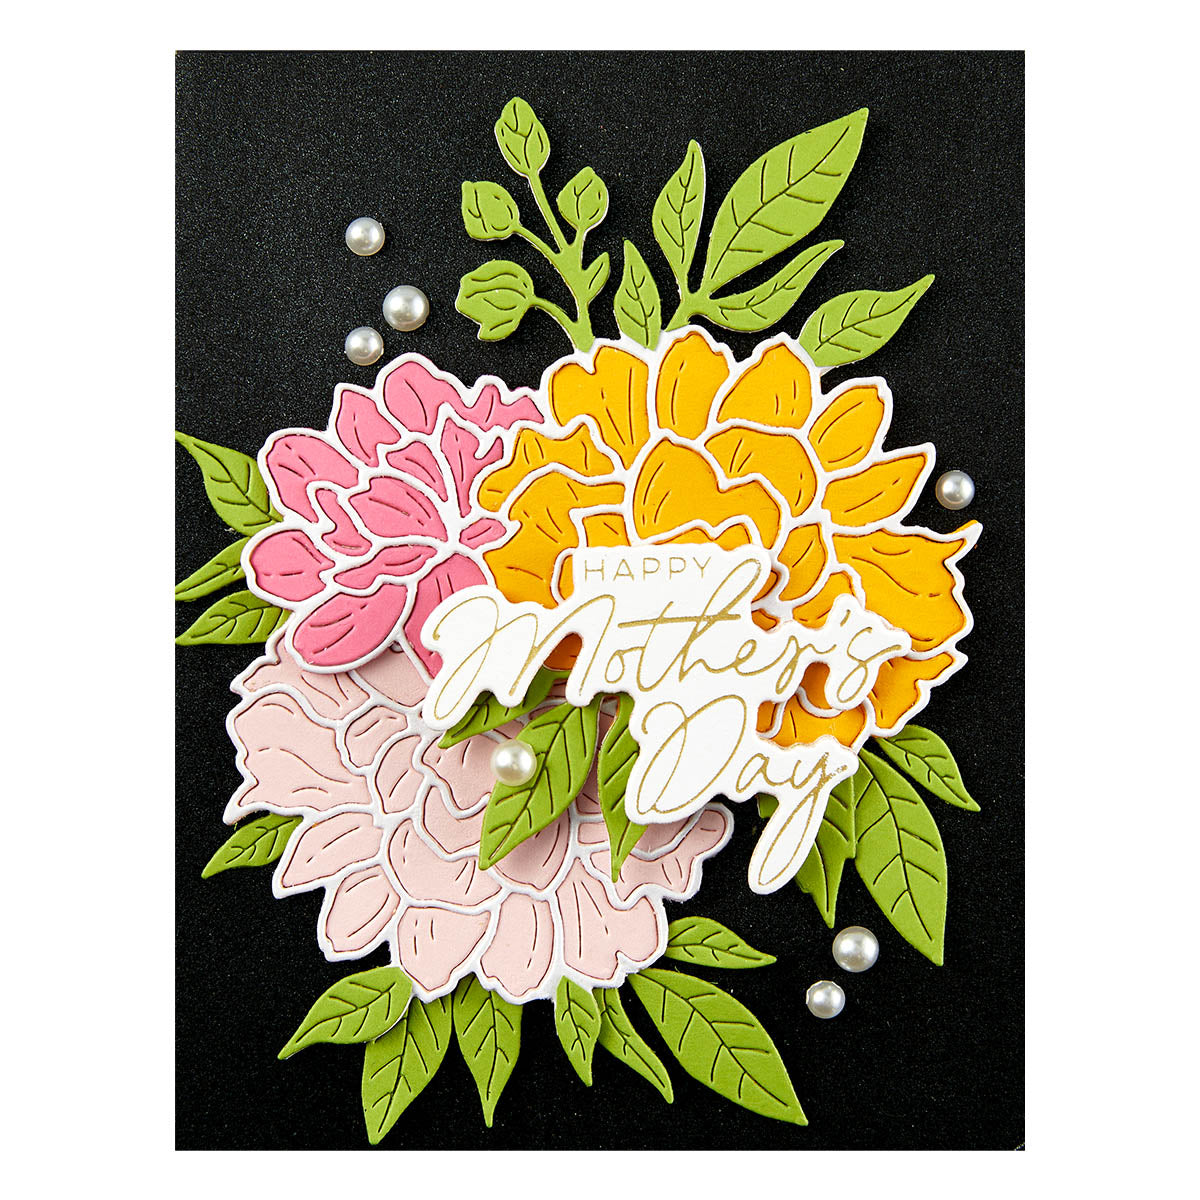 Spellbinders - Peony Celebration Etched Dies from the Let's Celebrate Collection by Yana Smakula